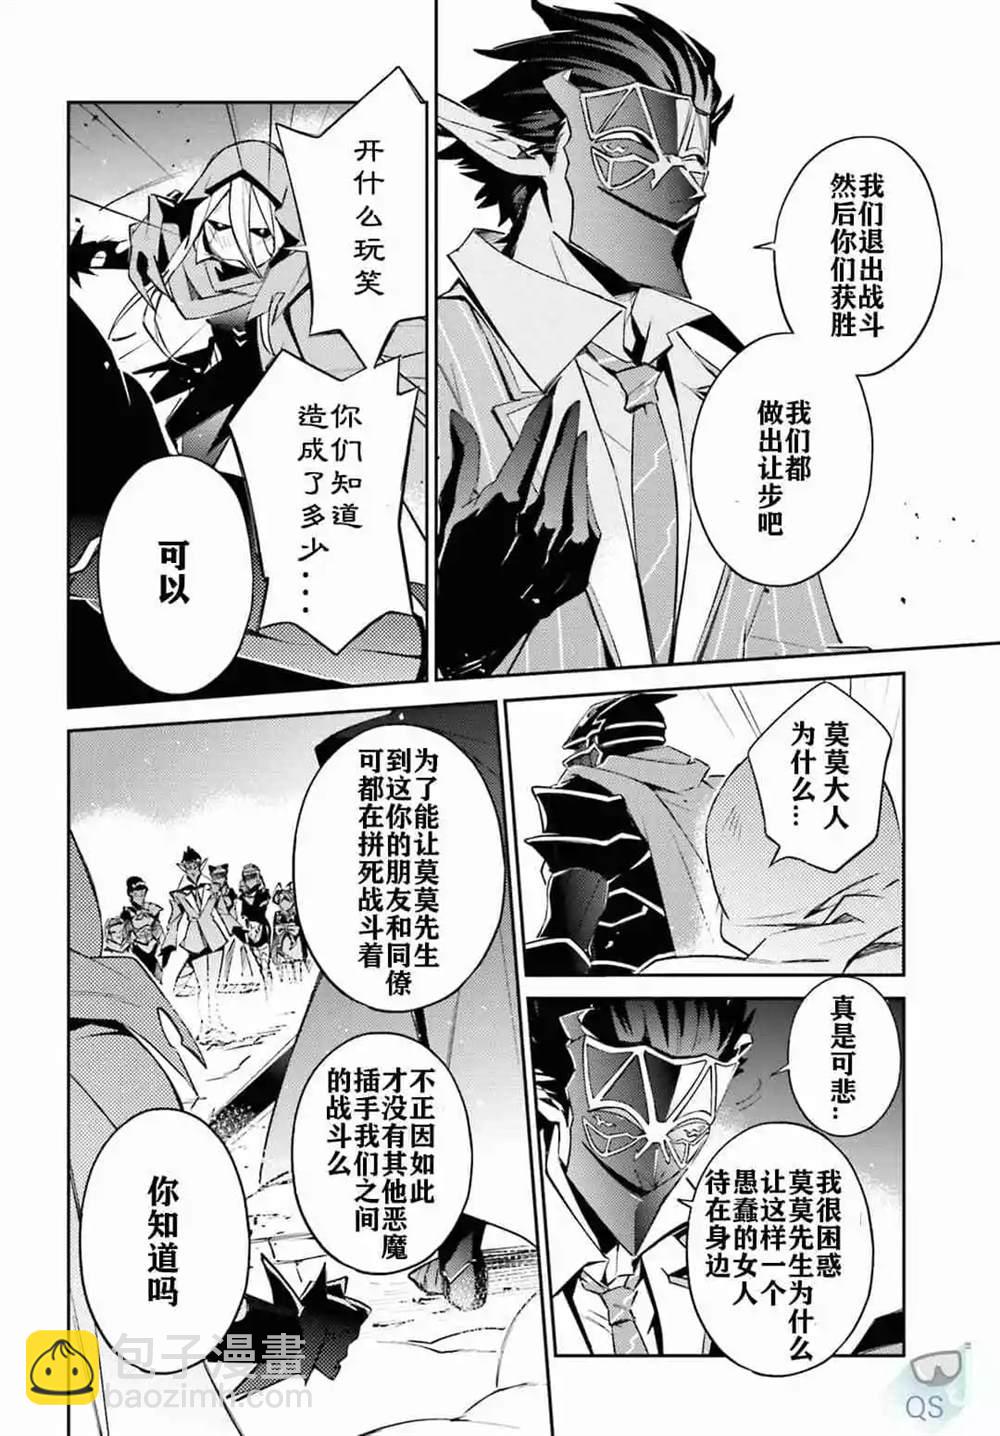 OVERLORD - 第52話 - 6